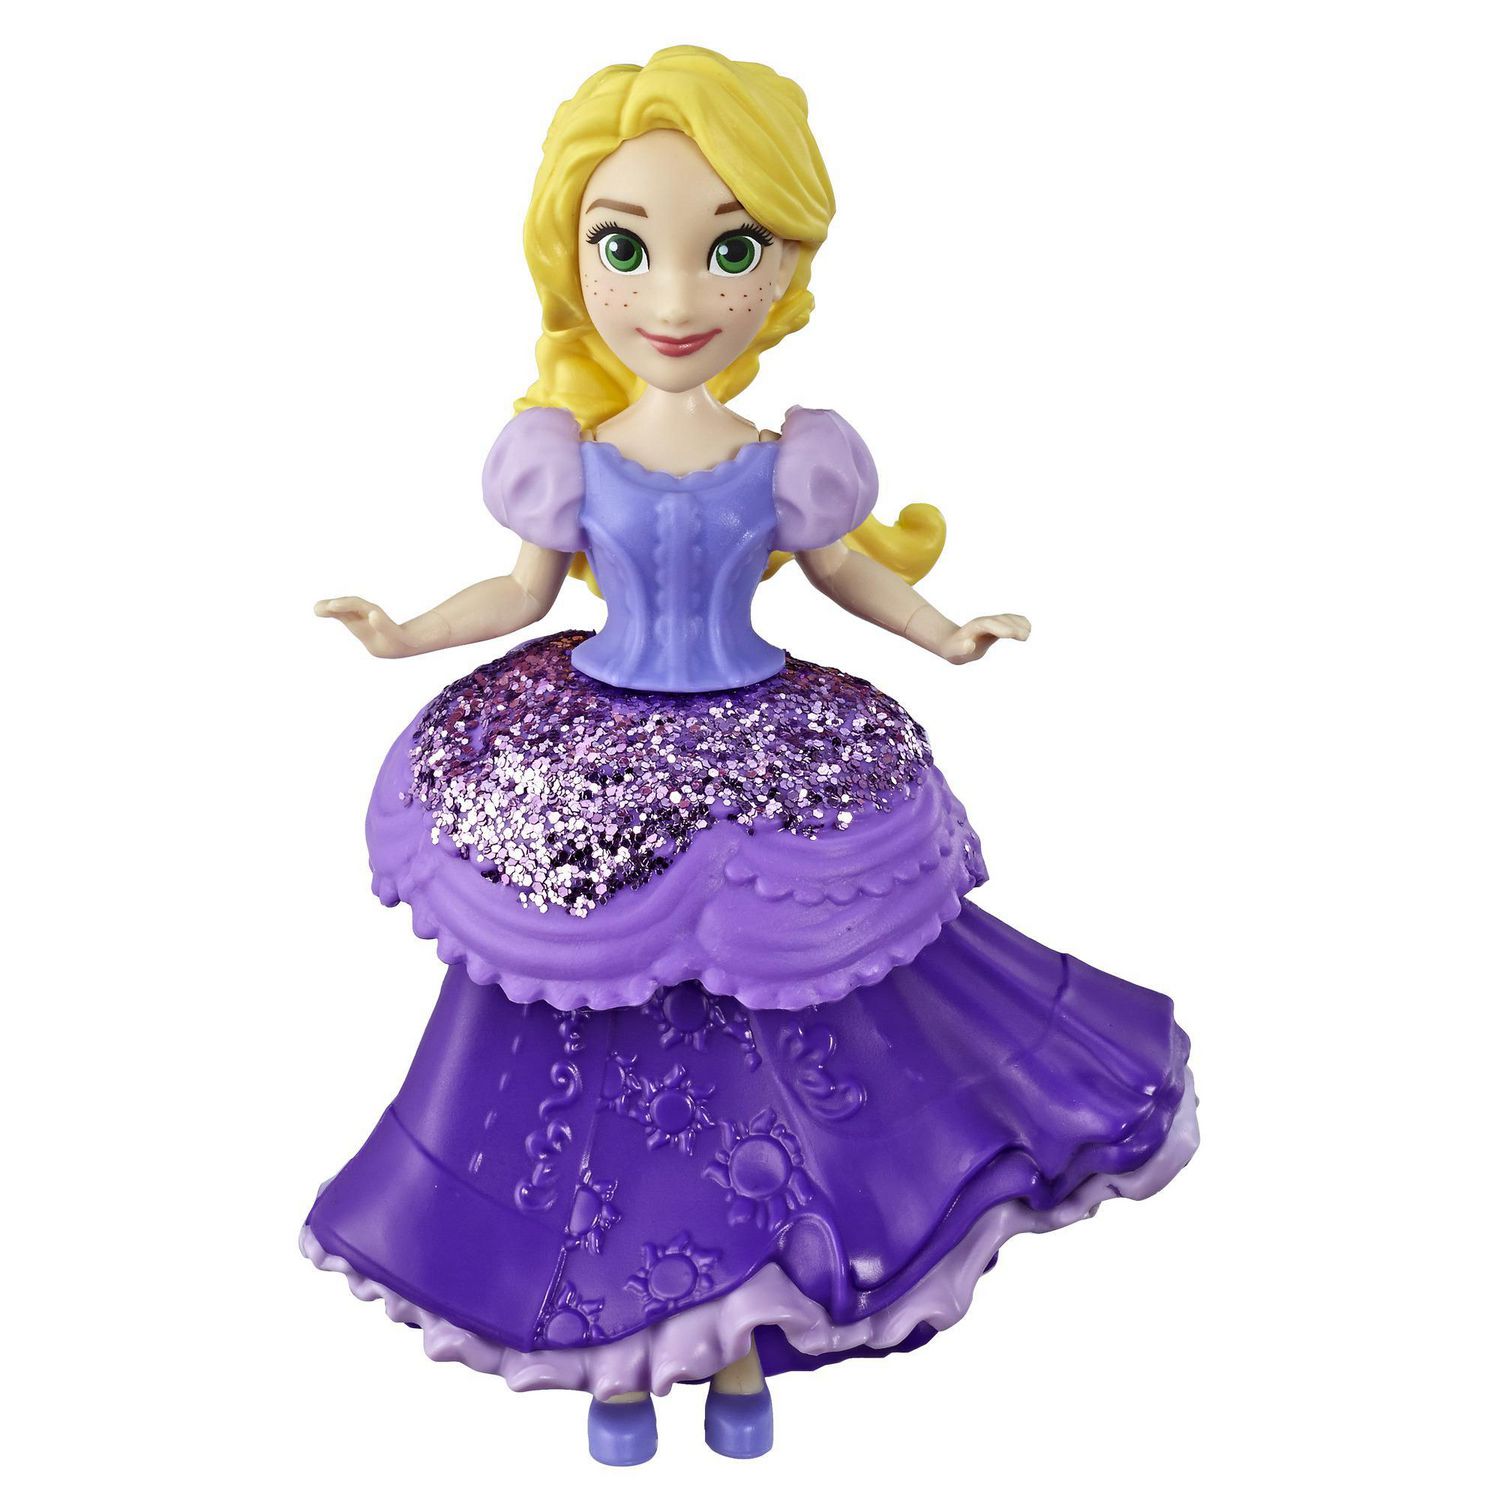 Disney Princess Rapunzel Collectible Doll With Glittery